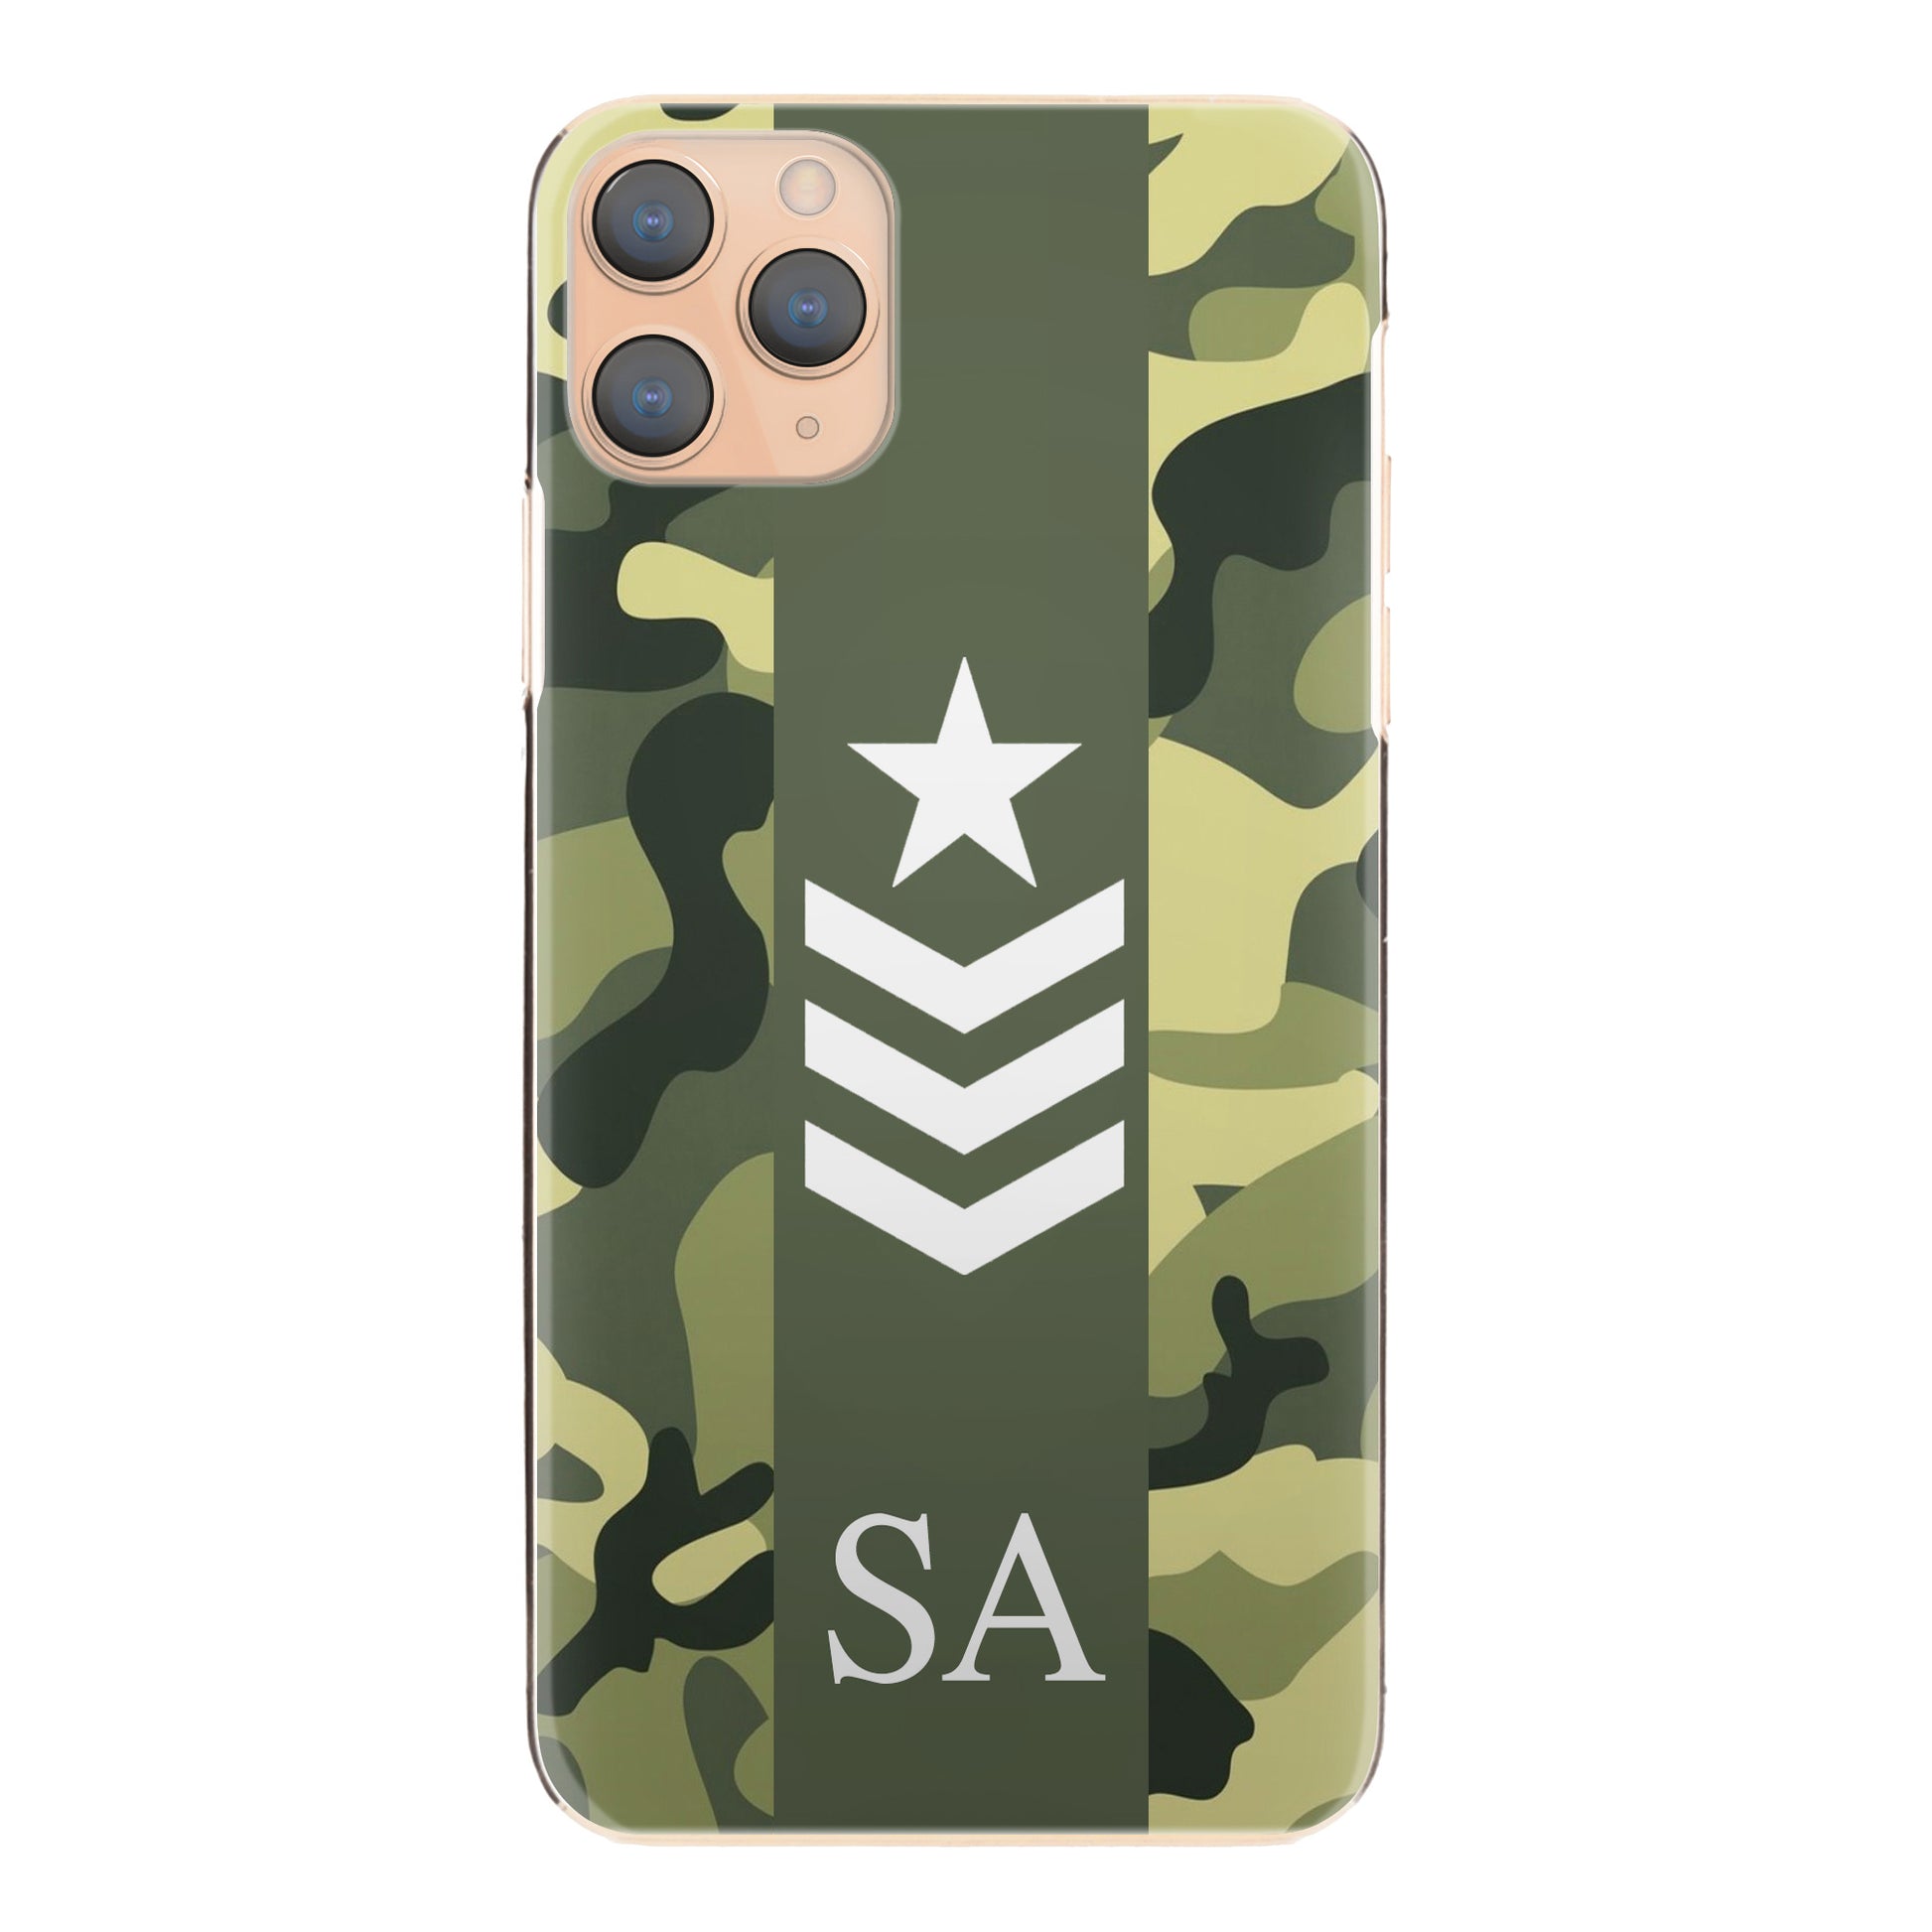 Personalised Motorola Phone Hard Case with Initials and Army Rank on Classic Green Camo